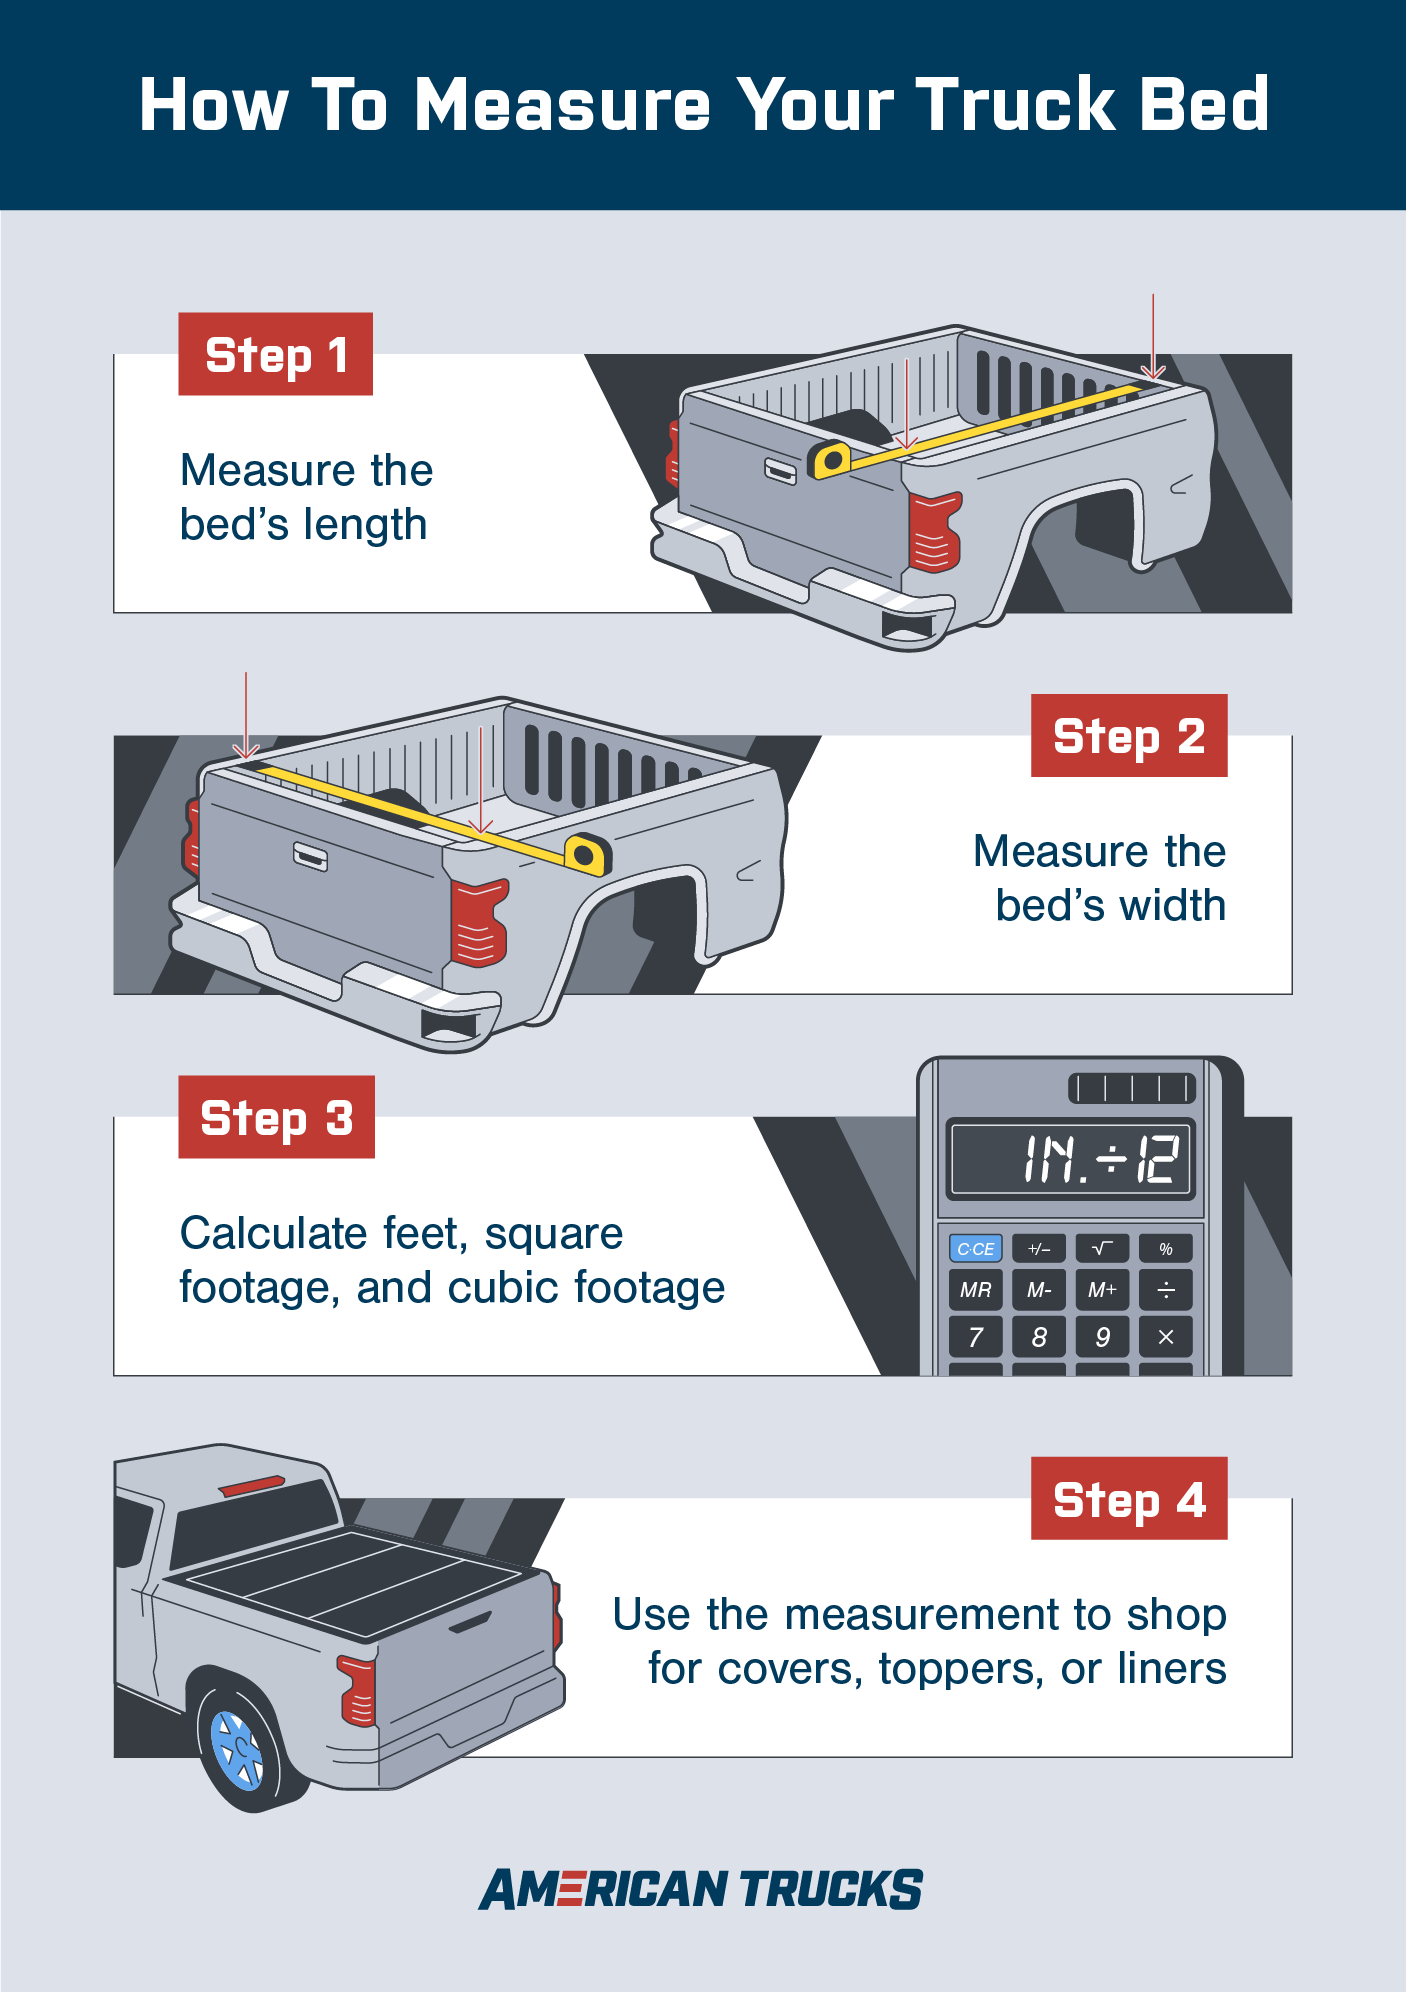 Graphic summary showing how to measure a truck bed